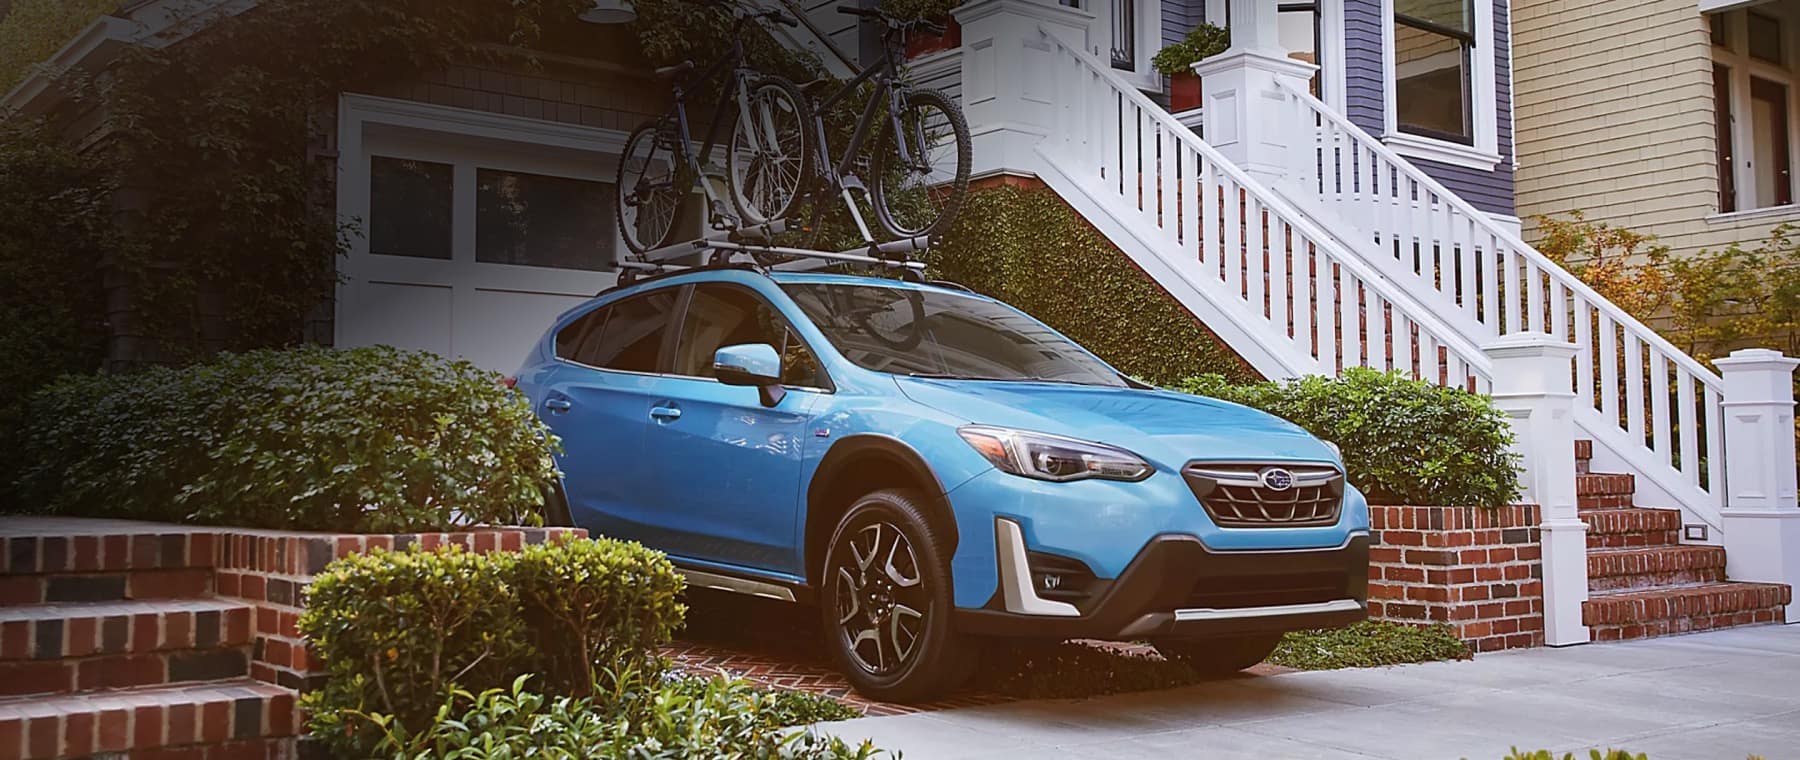 Blue Subaru Crosstrek parked in a driveway with bikes on the roof rack